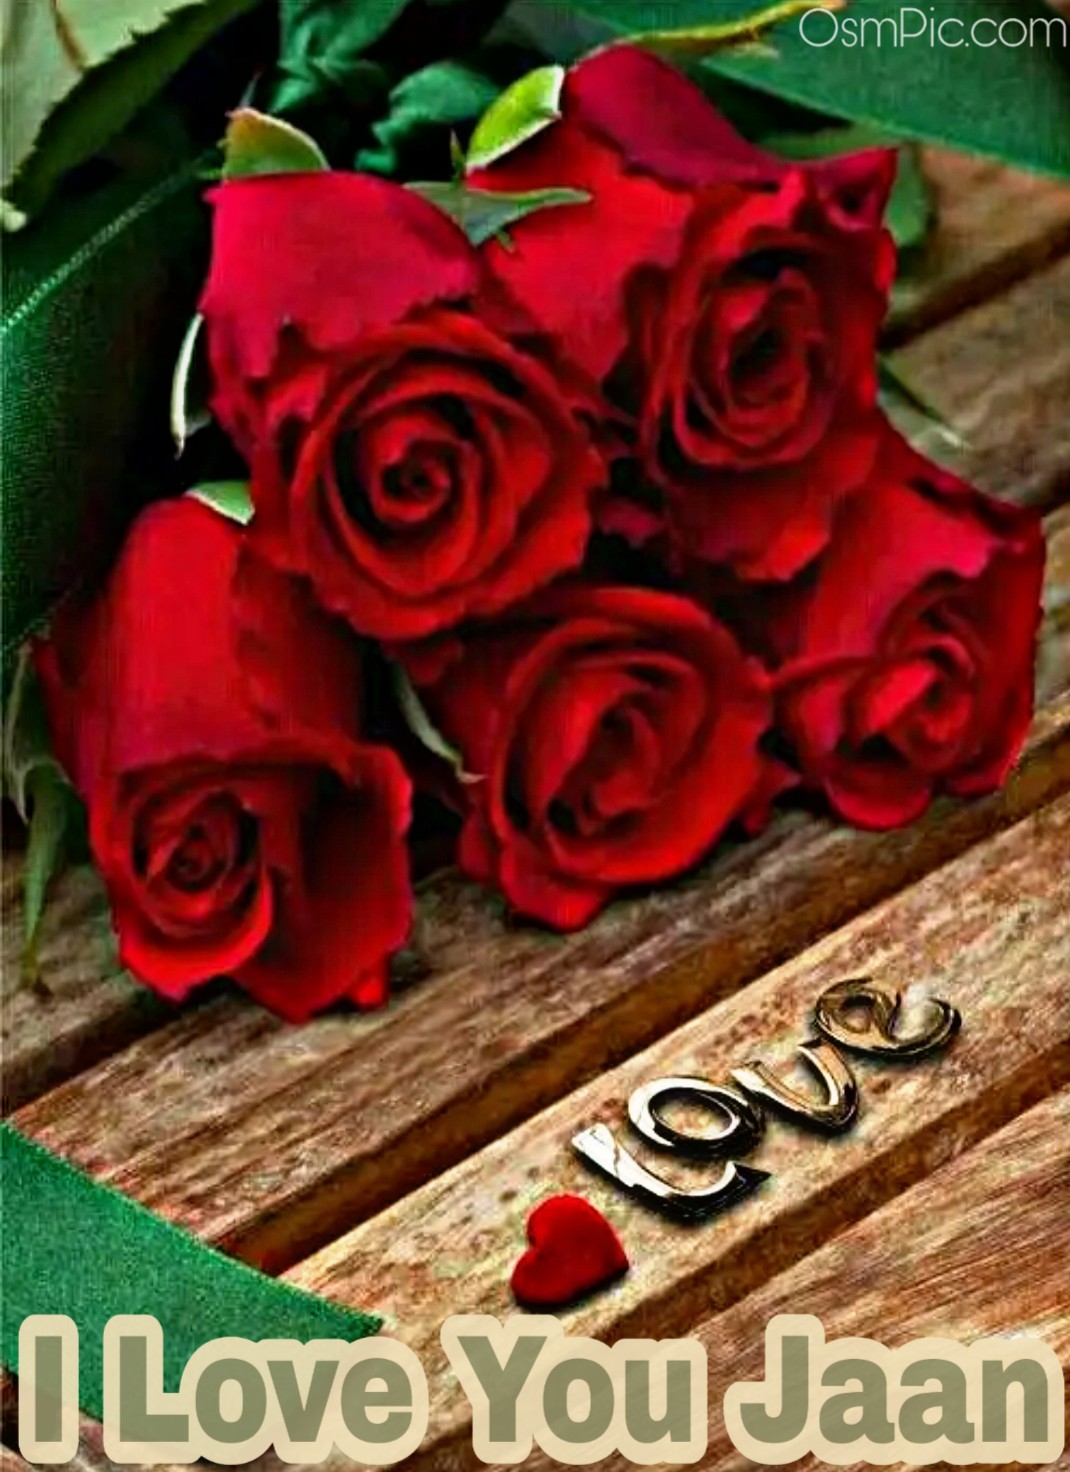 Most Beautiful I Love You Roses Image Pics Of Love Roses For Lovers